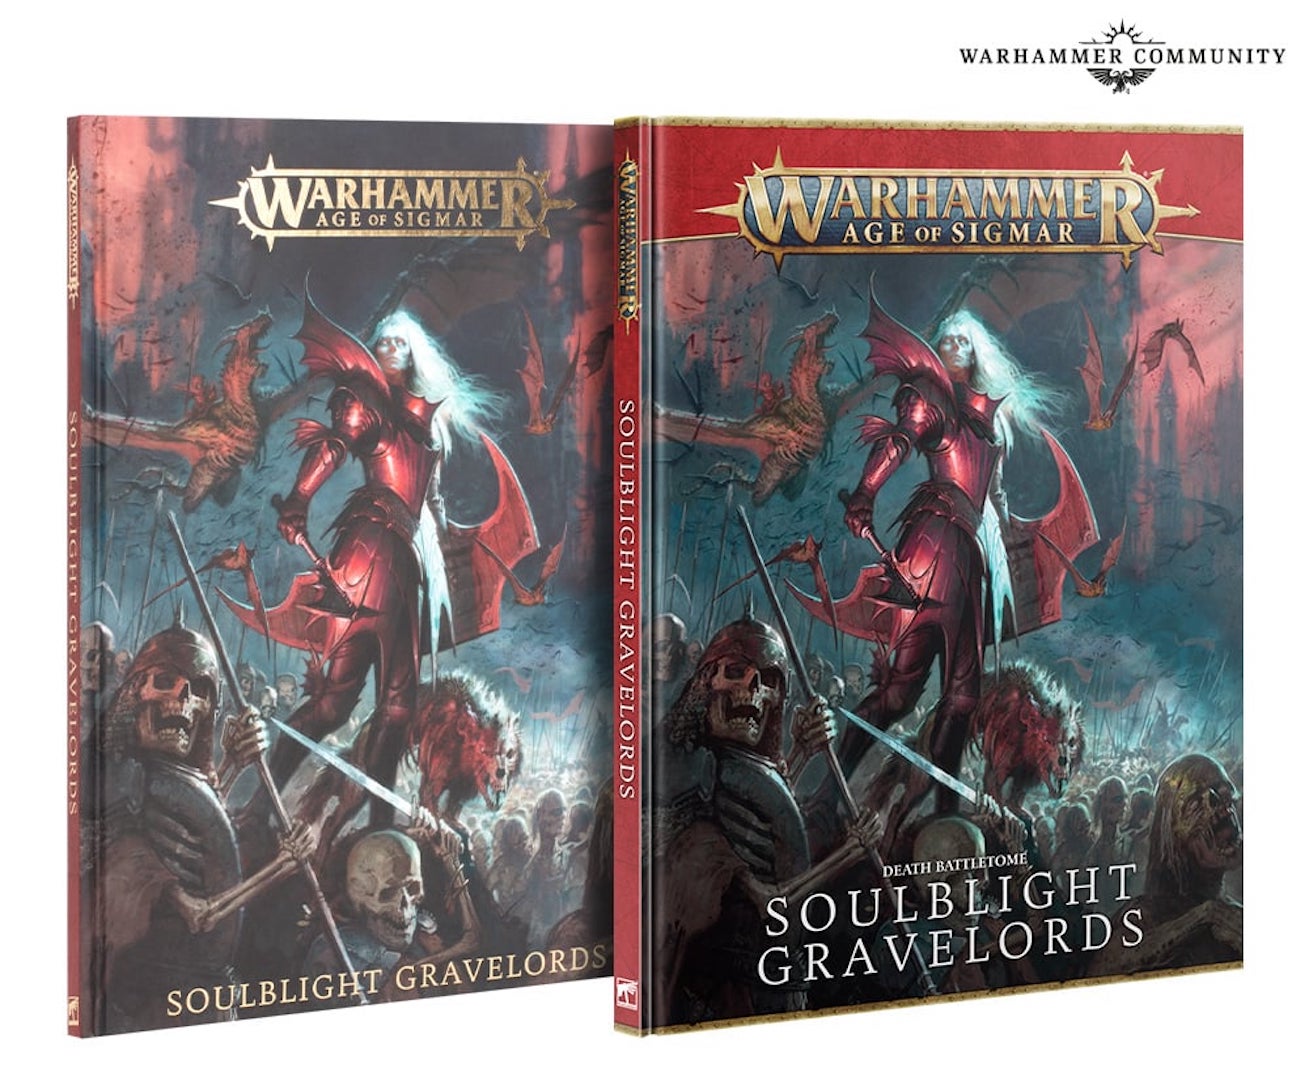 An image of the Warhammer Age of Sigmar  Soulblight Gravelords Battletome